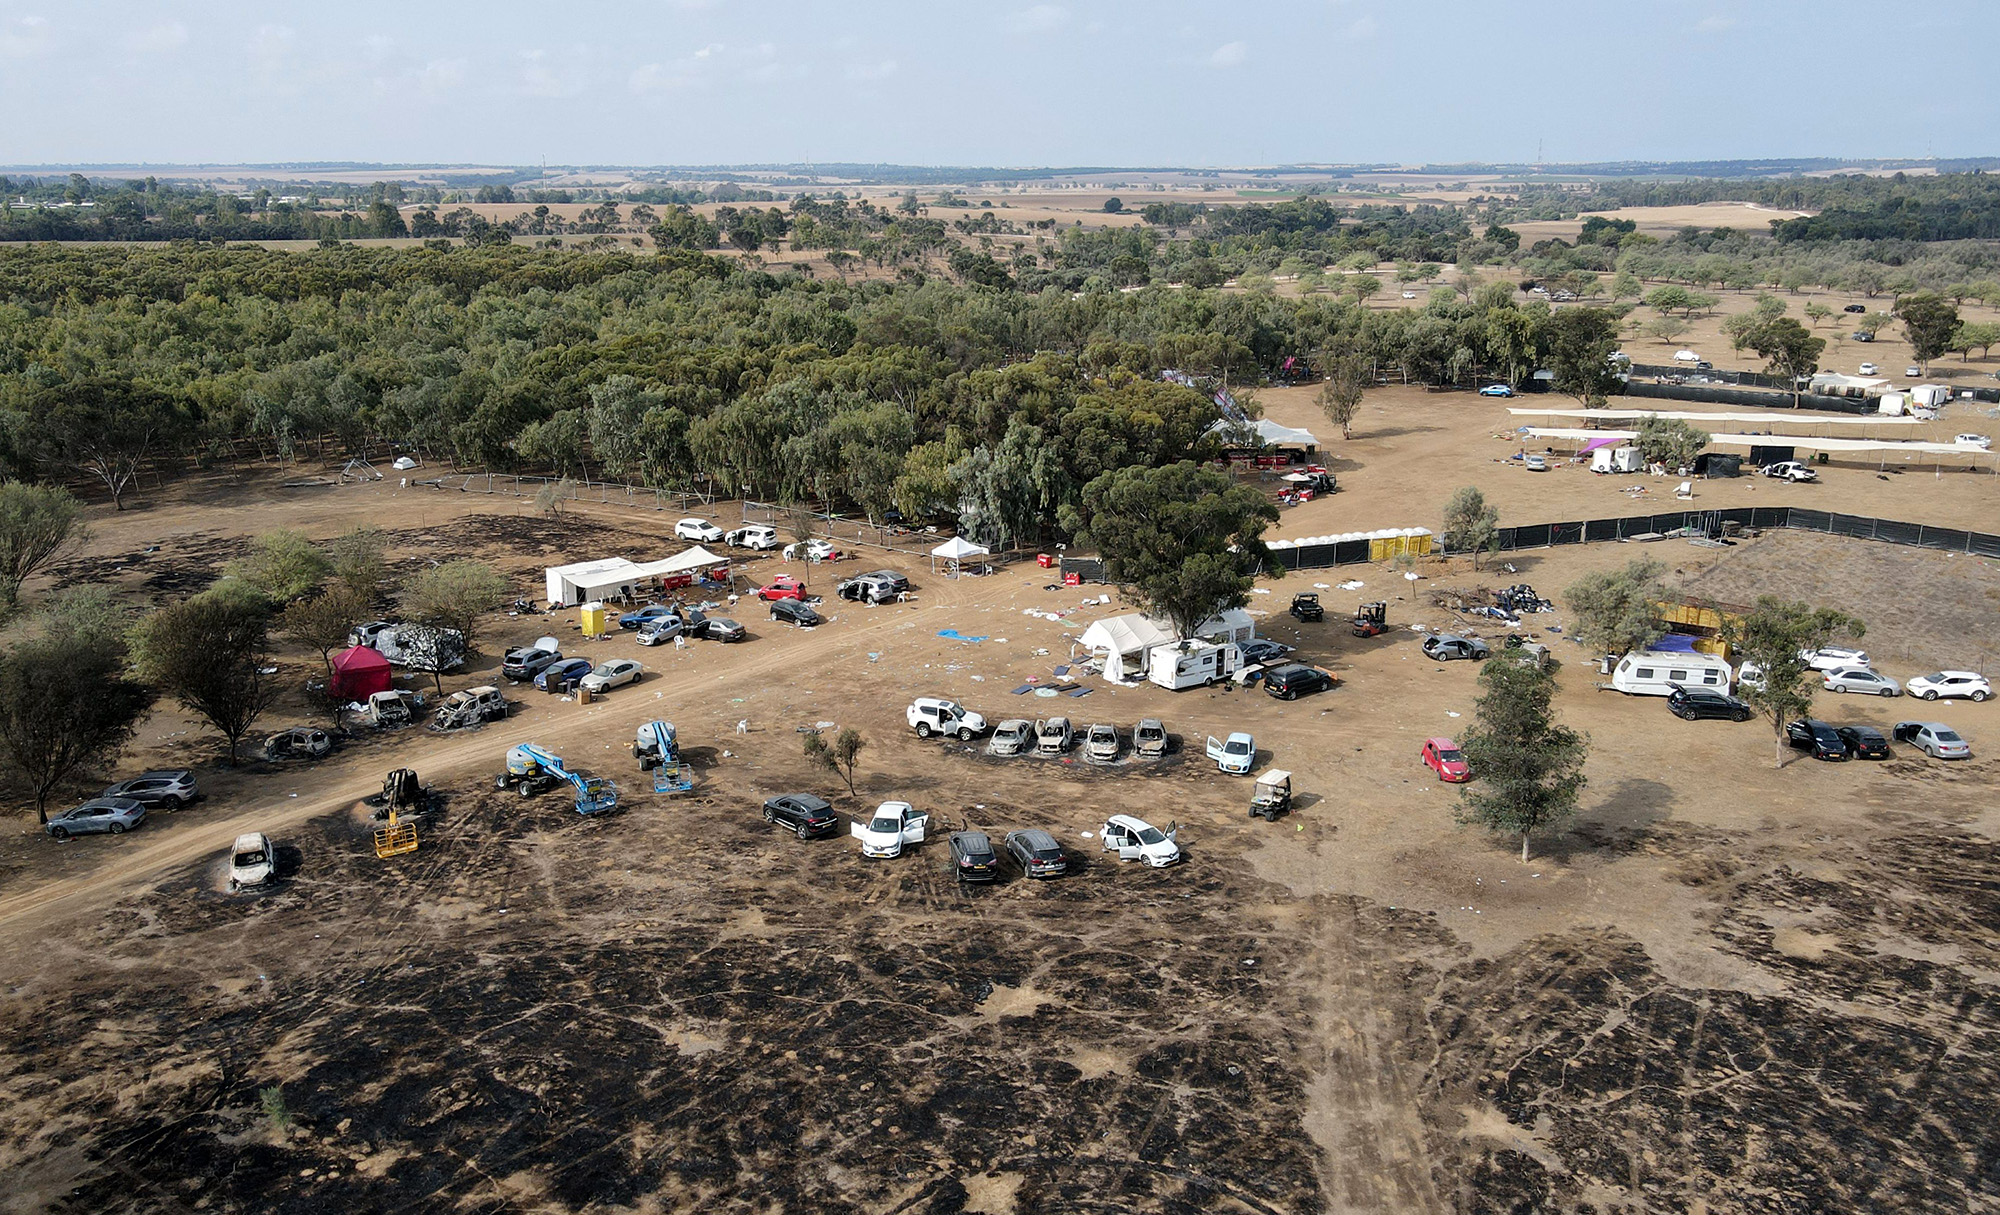 An aerial picture shows the abandoned site of the music festival in the Negev desert, southern Israel, on October 10.